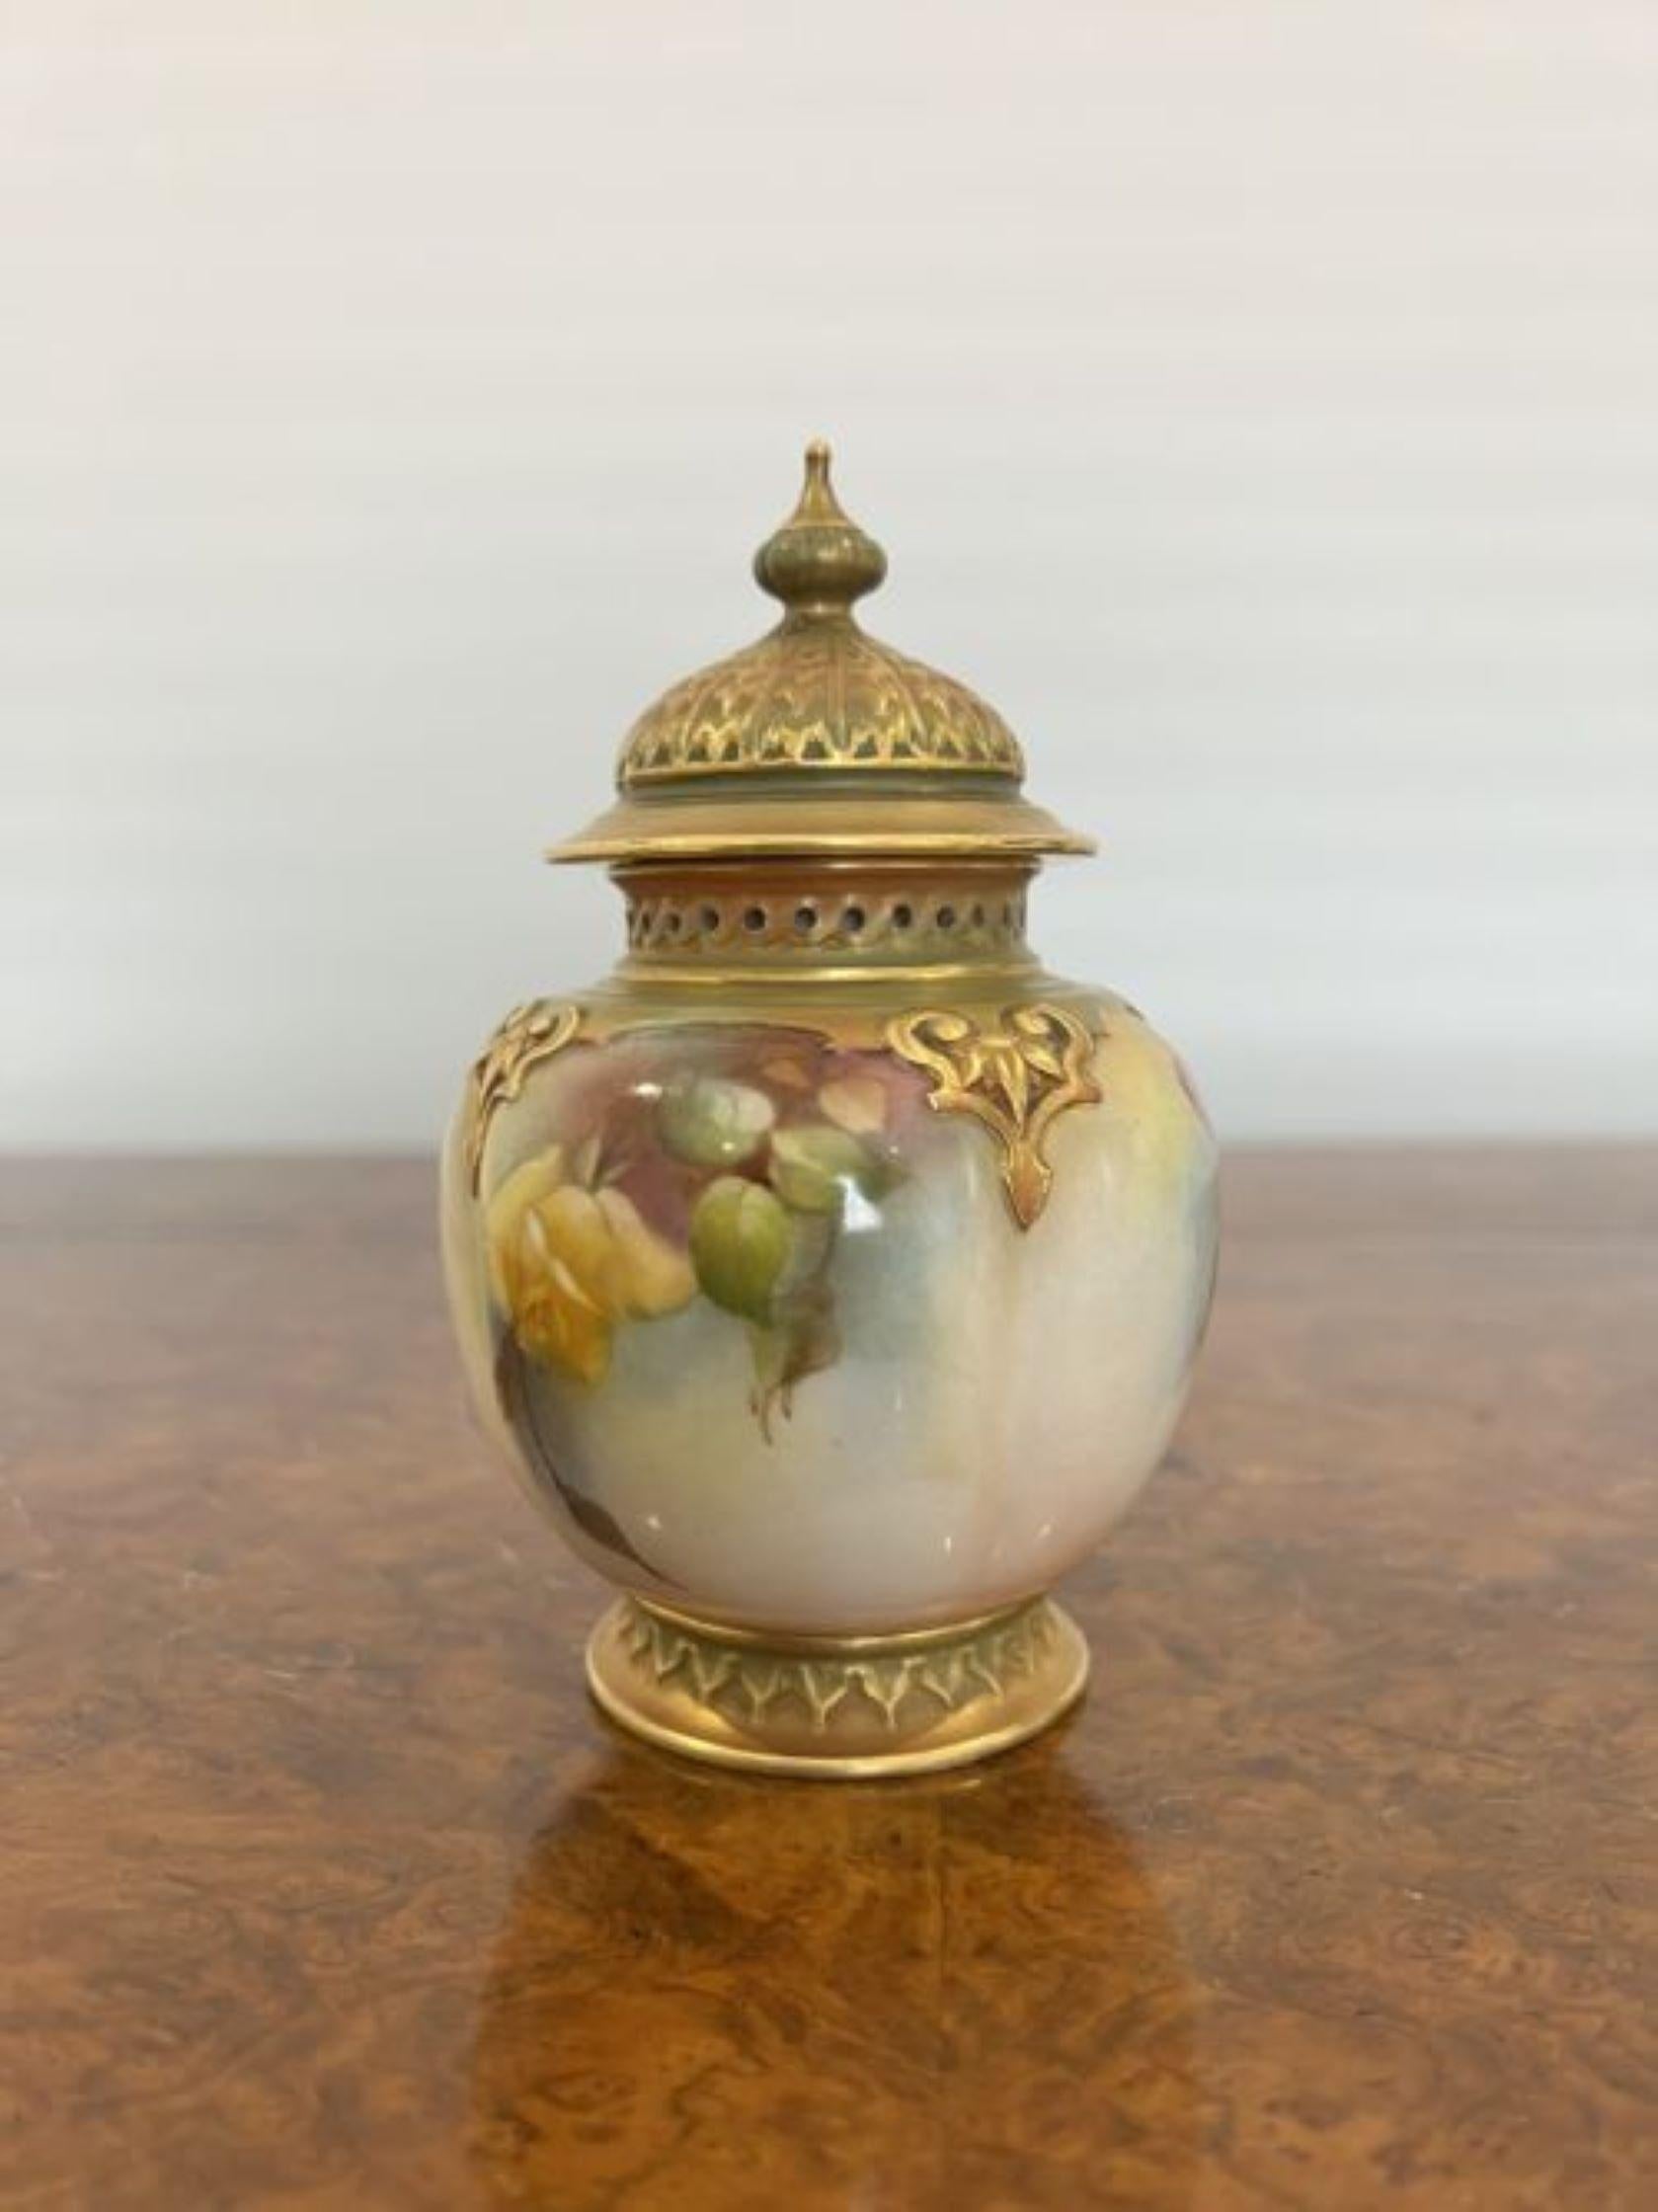 Quality antique Royal Worcester vase and cover having a moulded domed lid and gadrooned finial with a pierced rim above a moulded and scroll decorated body with wonderful puce and yellow rose decoration. Printed mark to the bottom and hand numbered 